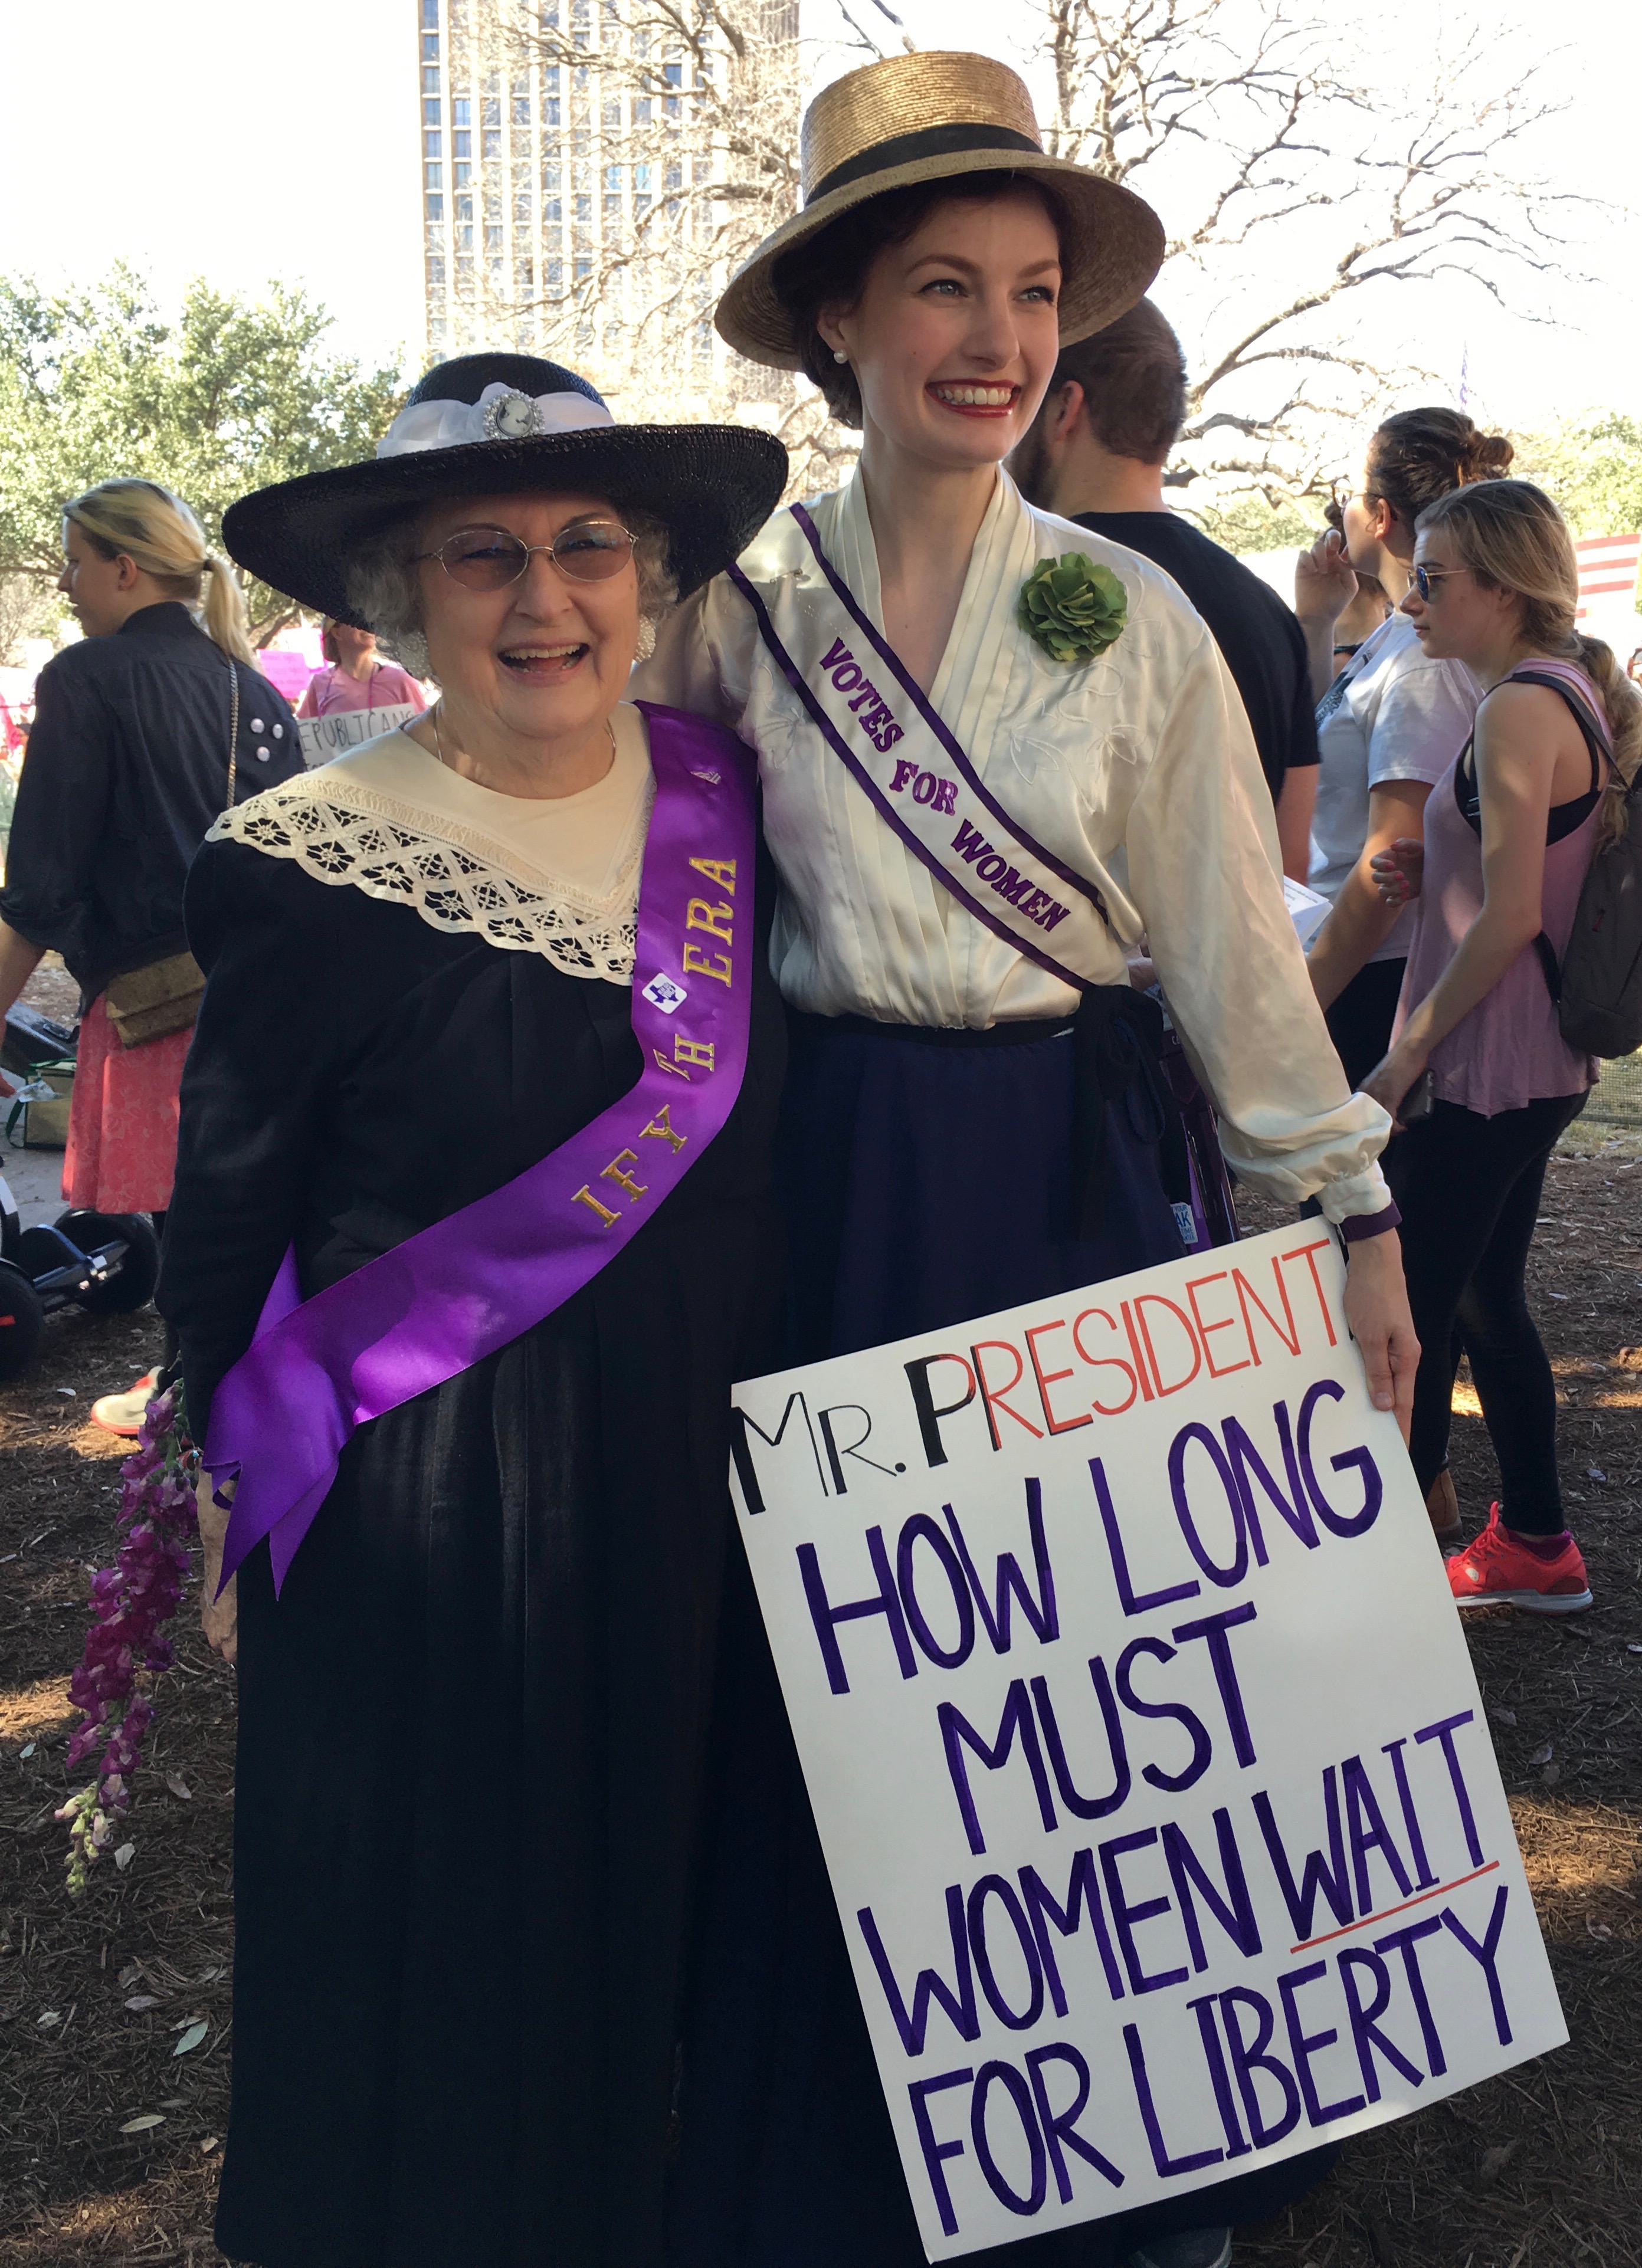 Suffragists dressed in vintage clothes at the Women's March 